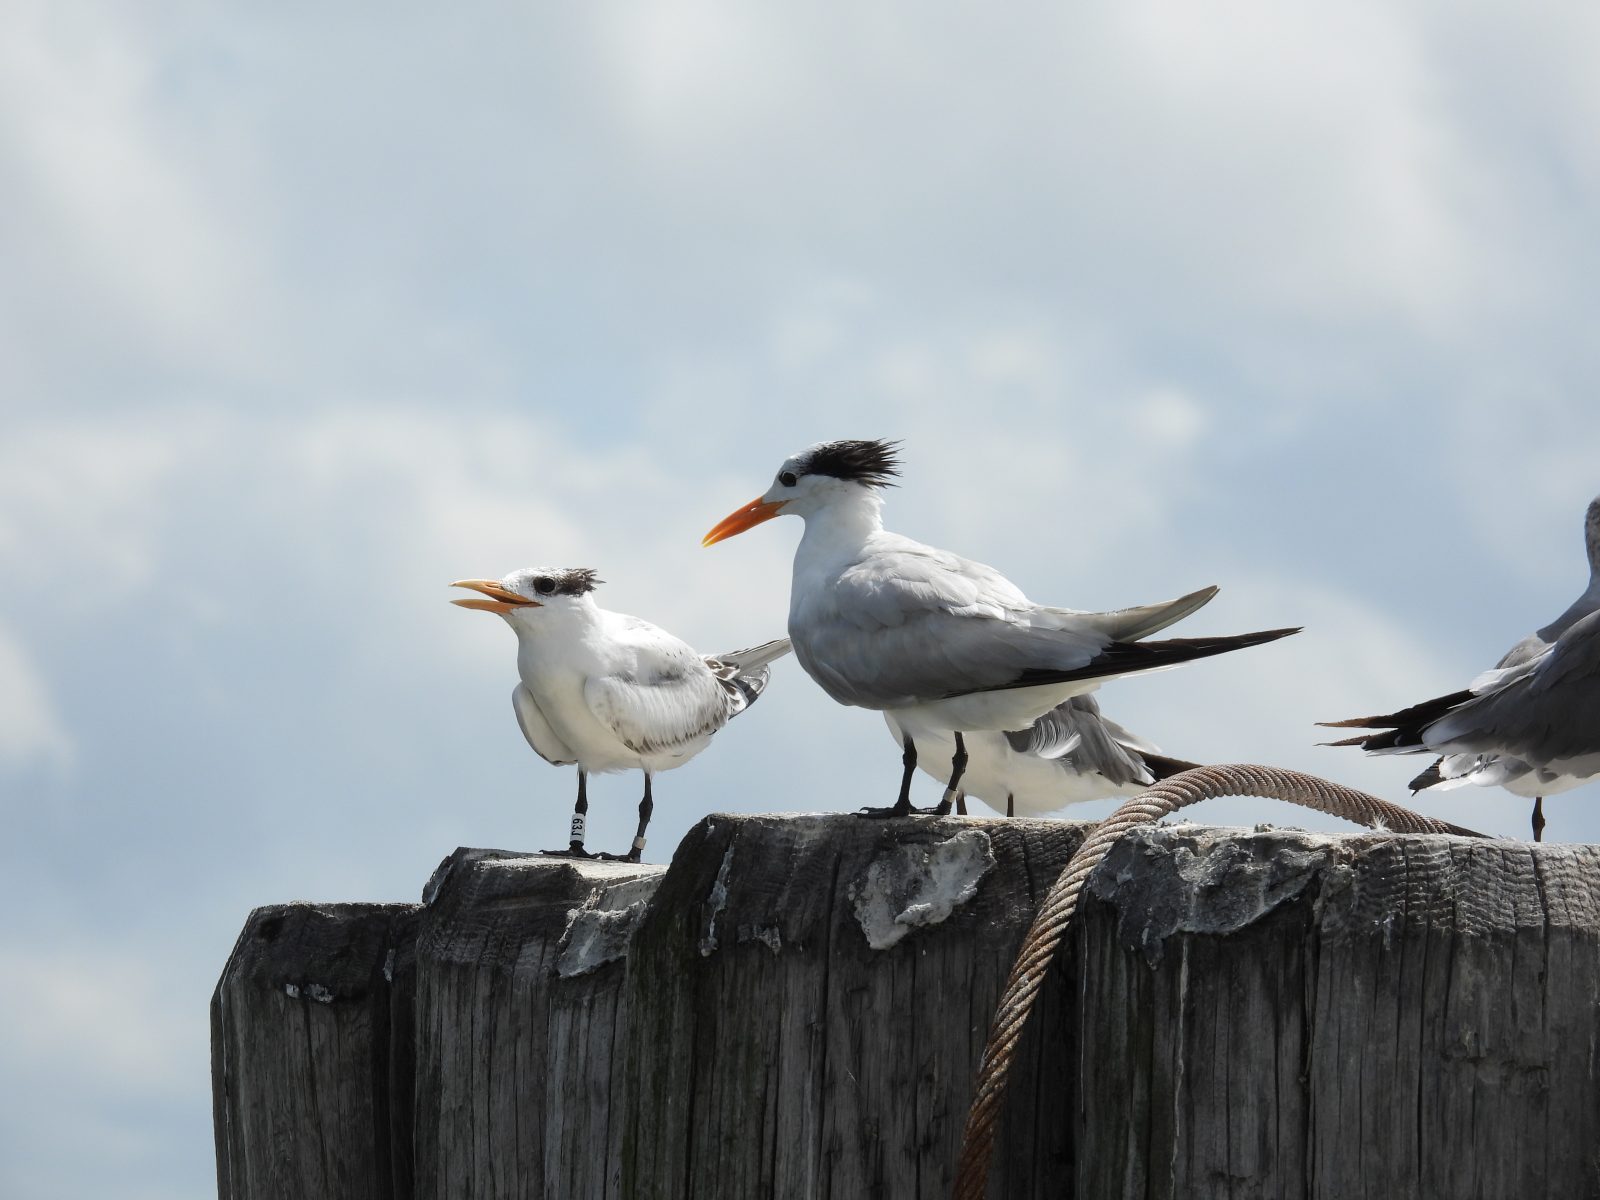 A 2021-banded royal tern fledgling (left) perches on a piling, One of the parents (right) stands with it and was observed feeding this fledgling just before this photo was taken.